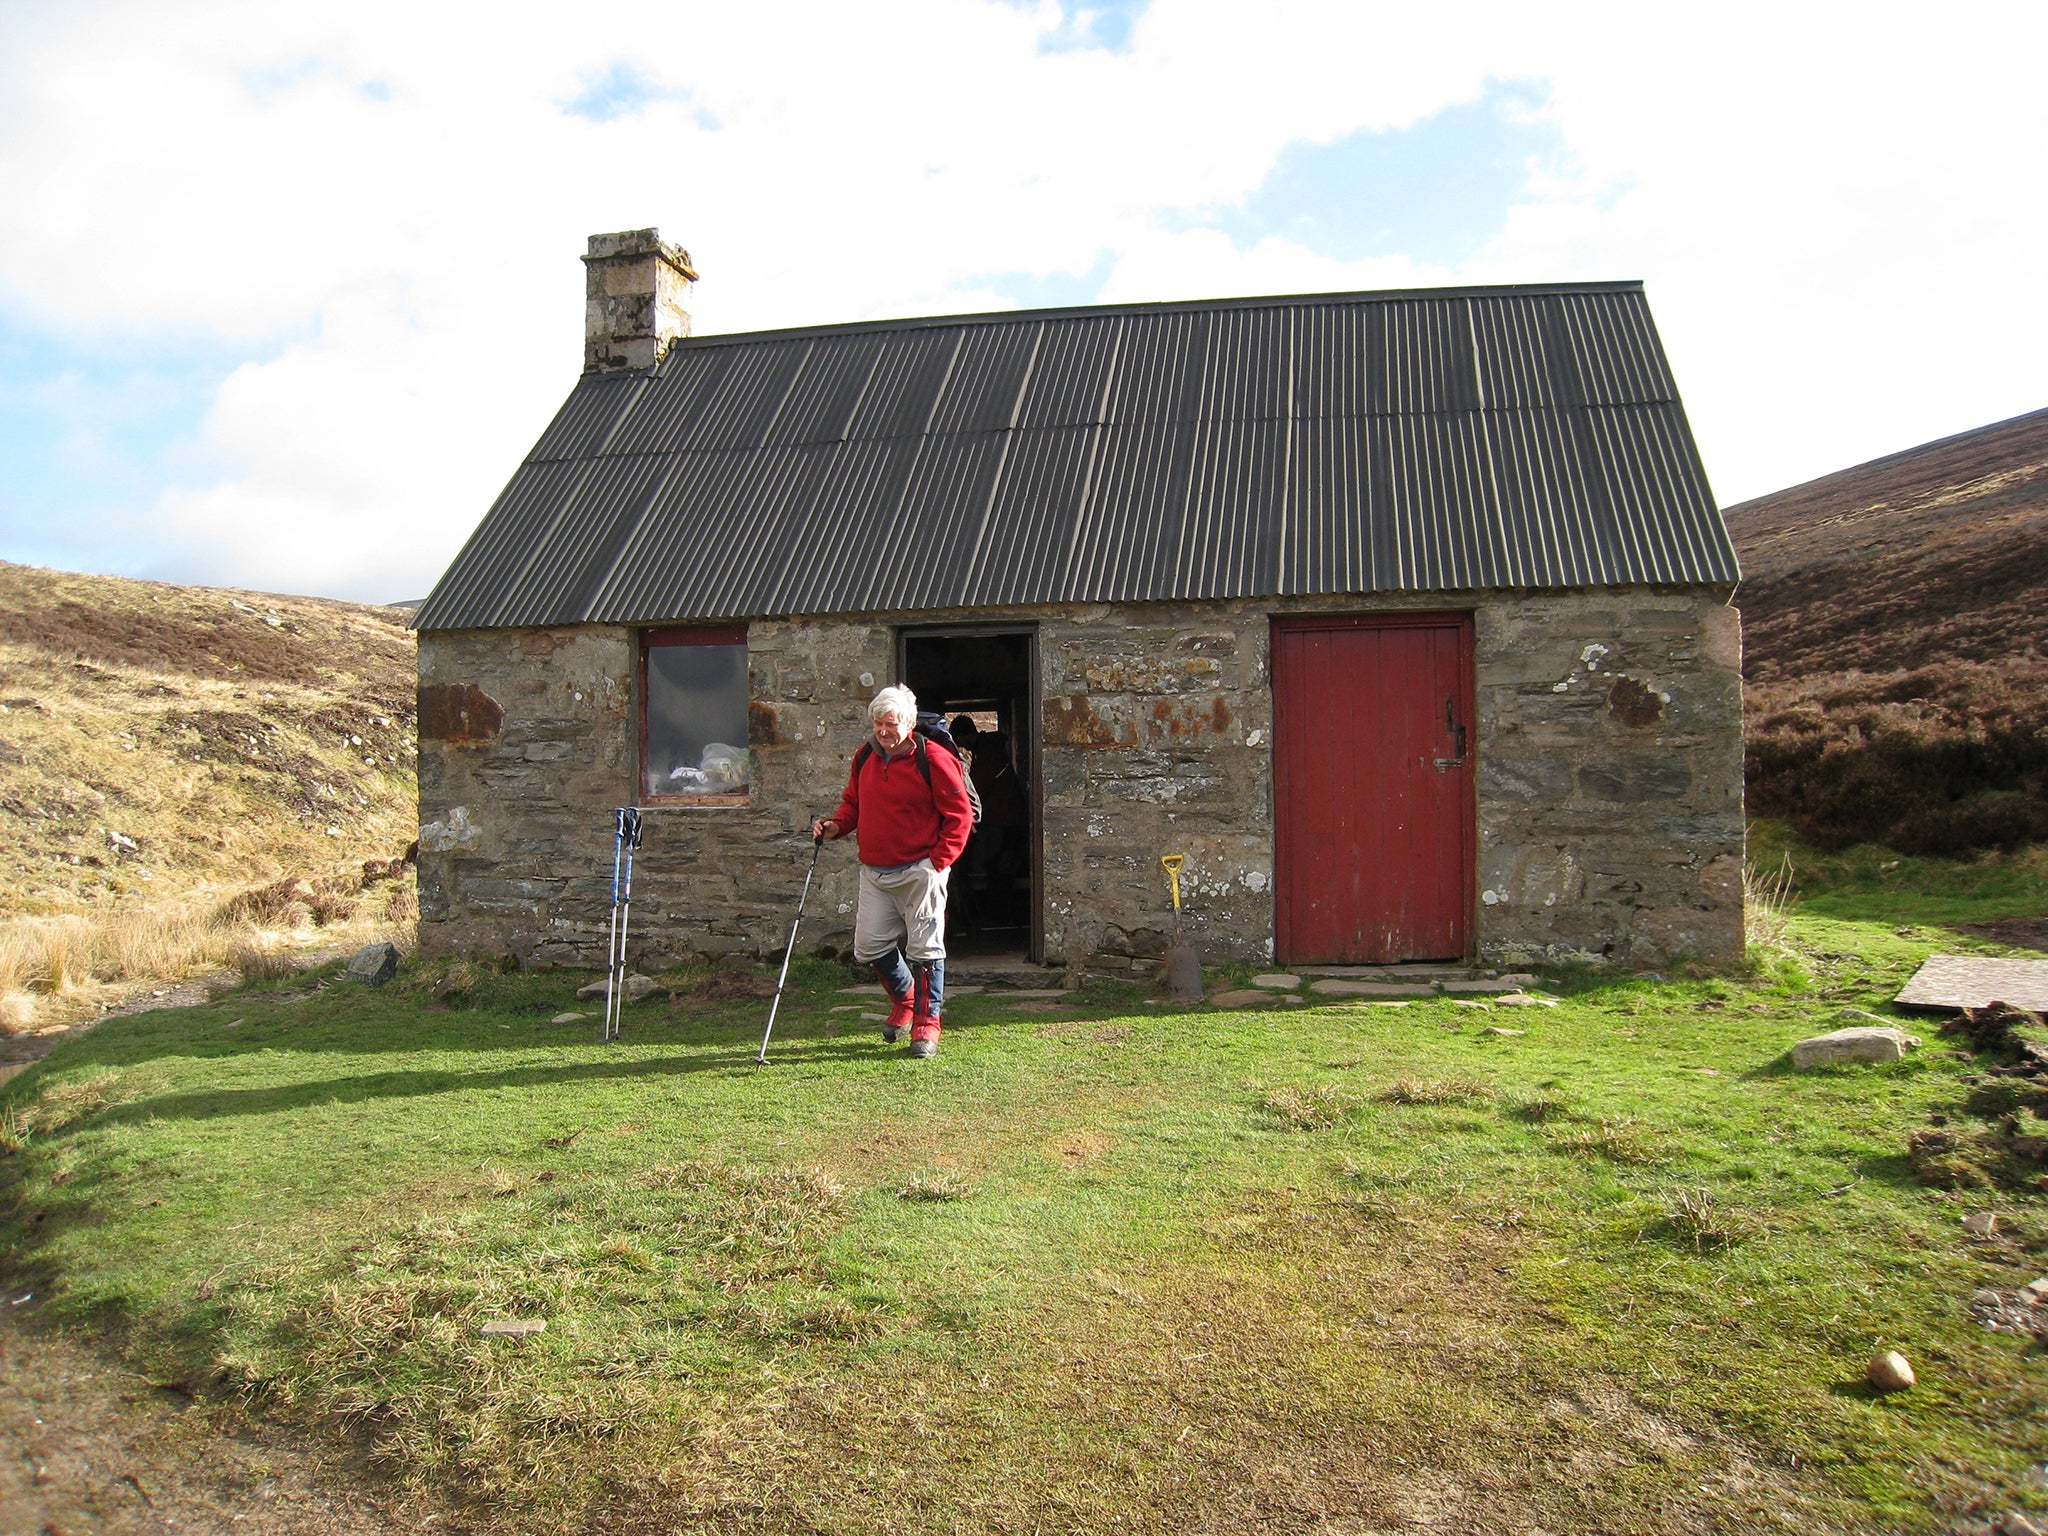 Bothies, mostly small stone huts in remote spots, are little known outside of hiking circles